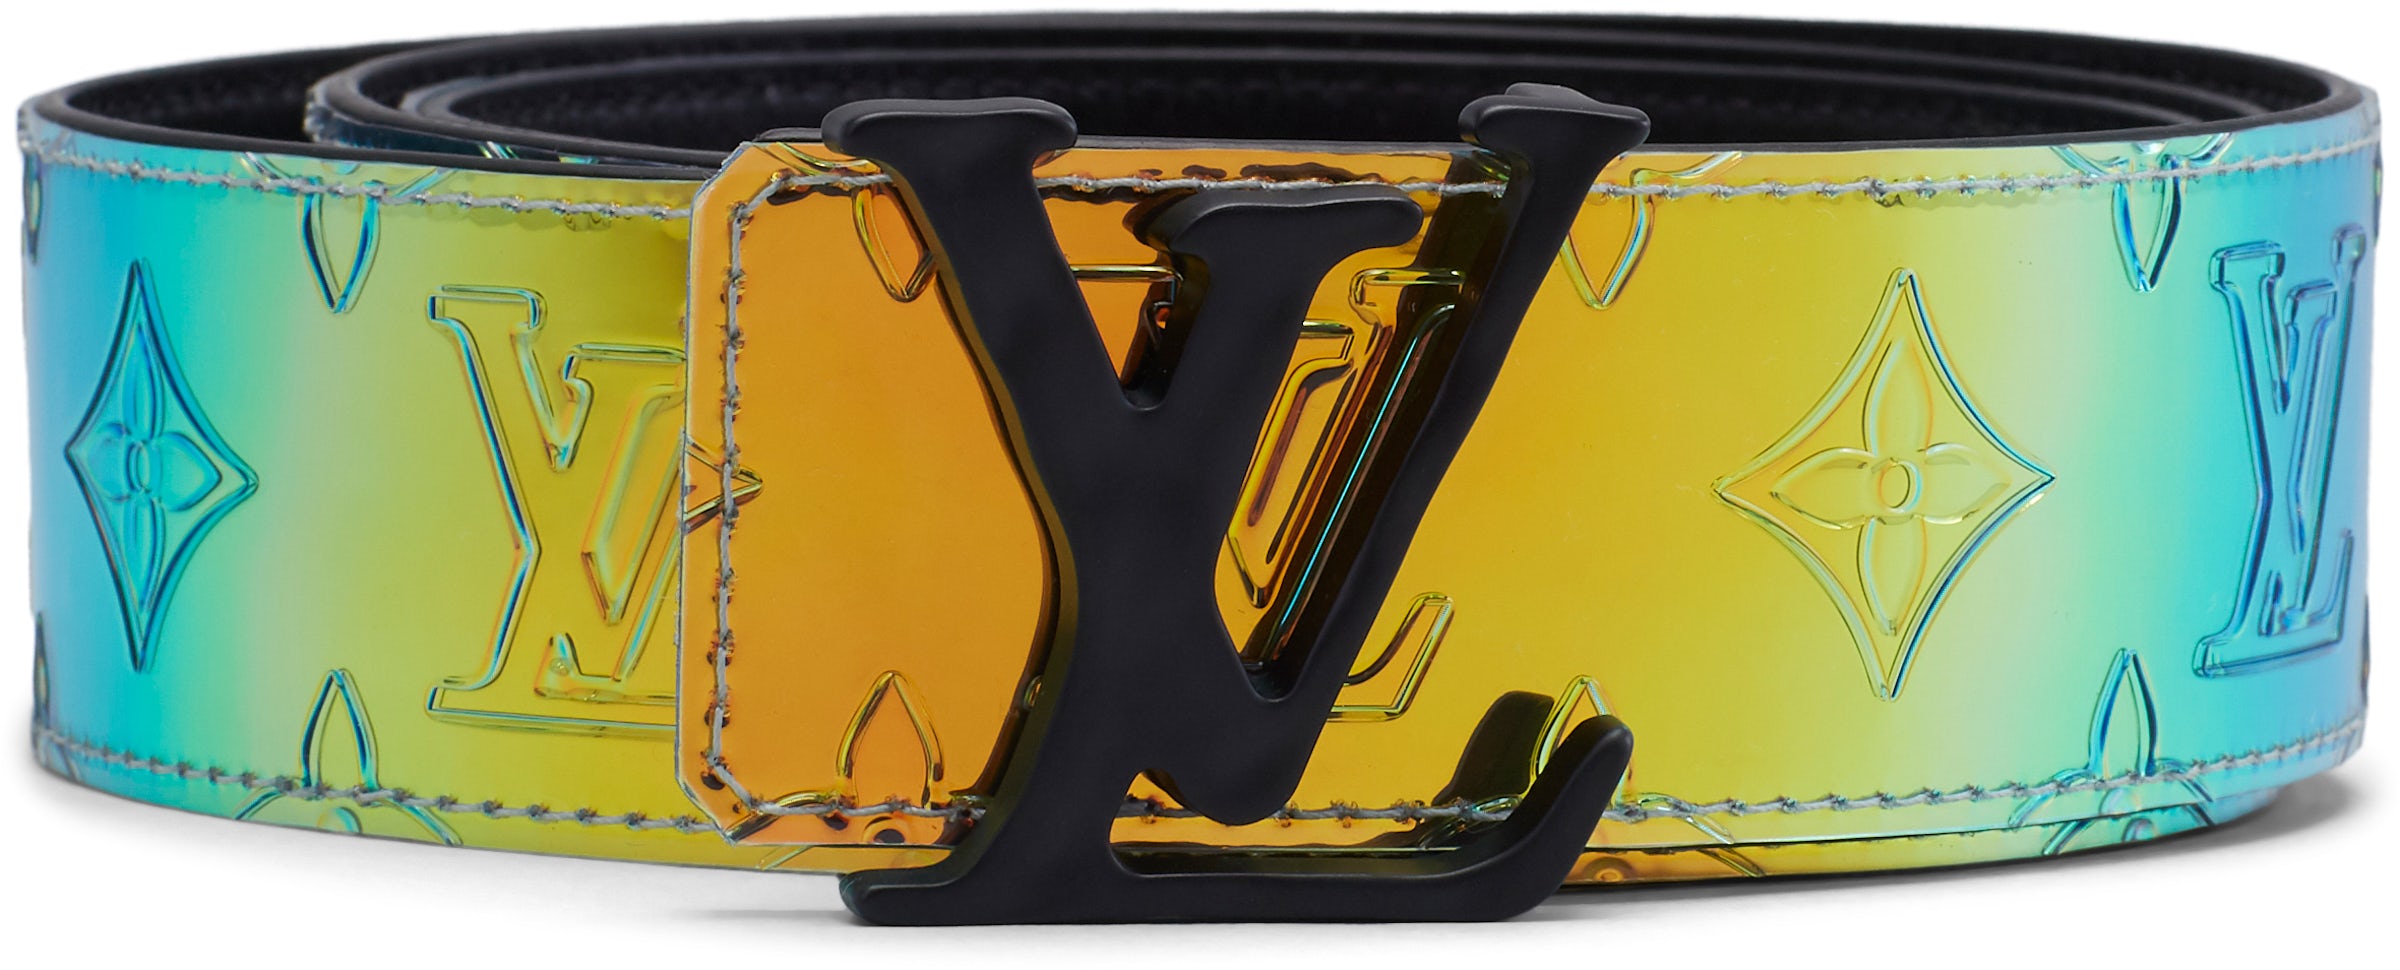 Check out the Louis Vuitton LV Initials Reversible Belt Monogram 40MM  Volcano Orange available on StockX